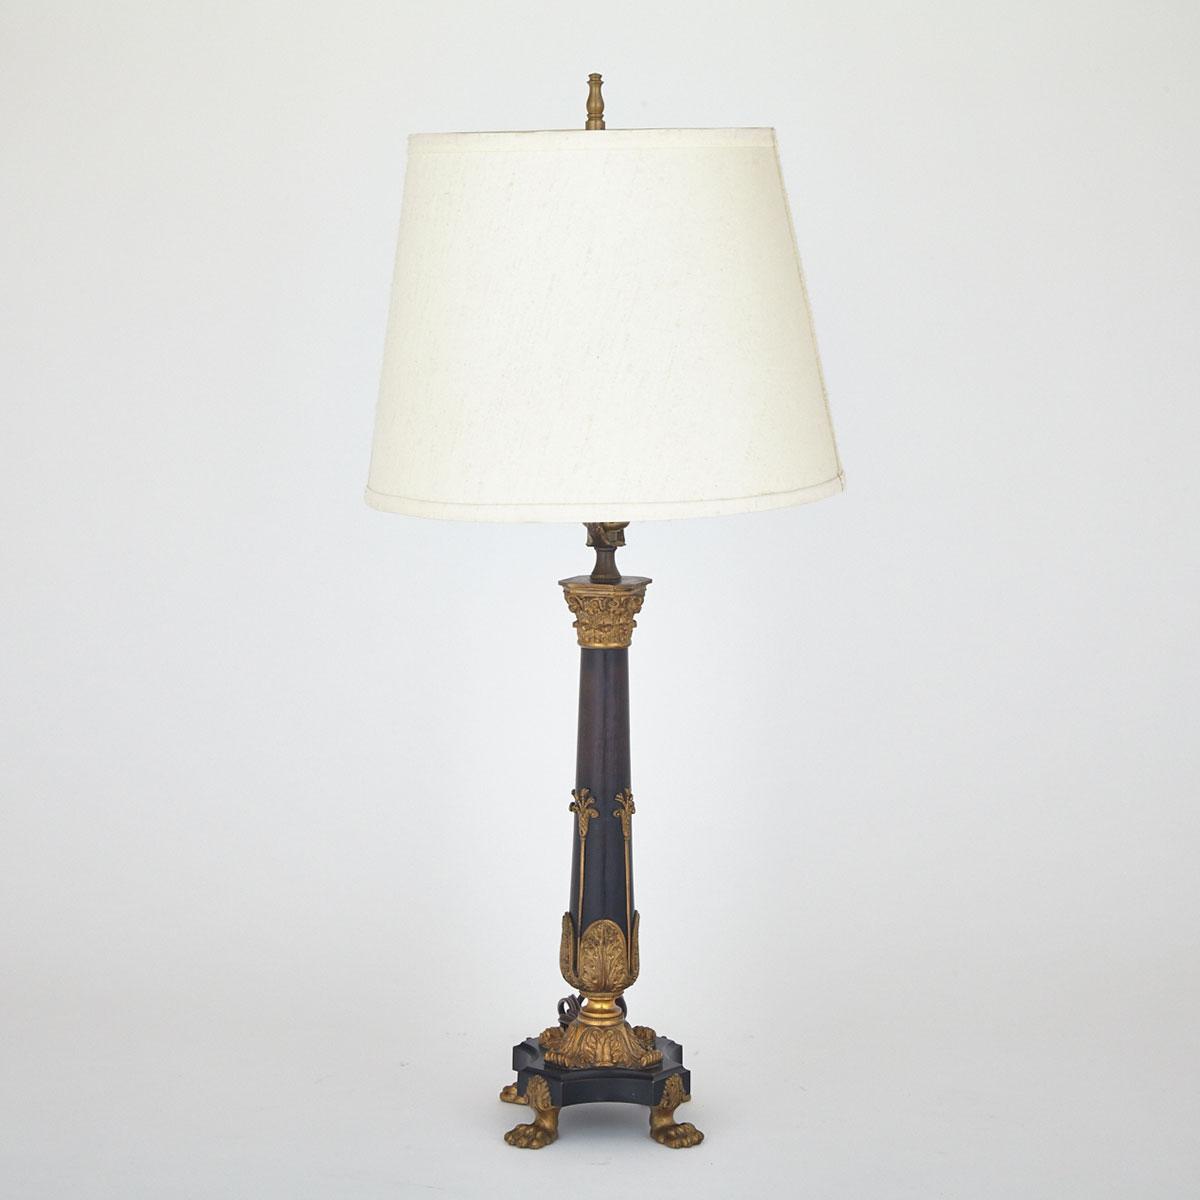 Austrian Empire Style Gilt and Patinated Bronze Column Form Table Lamp, early 20th century